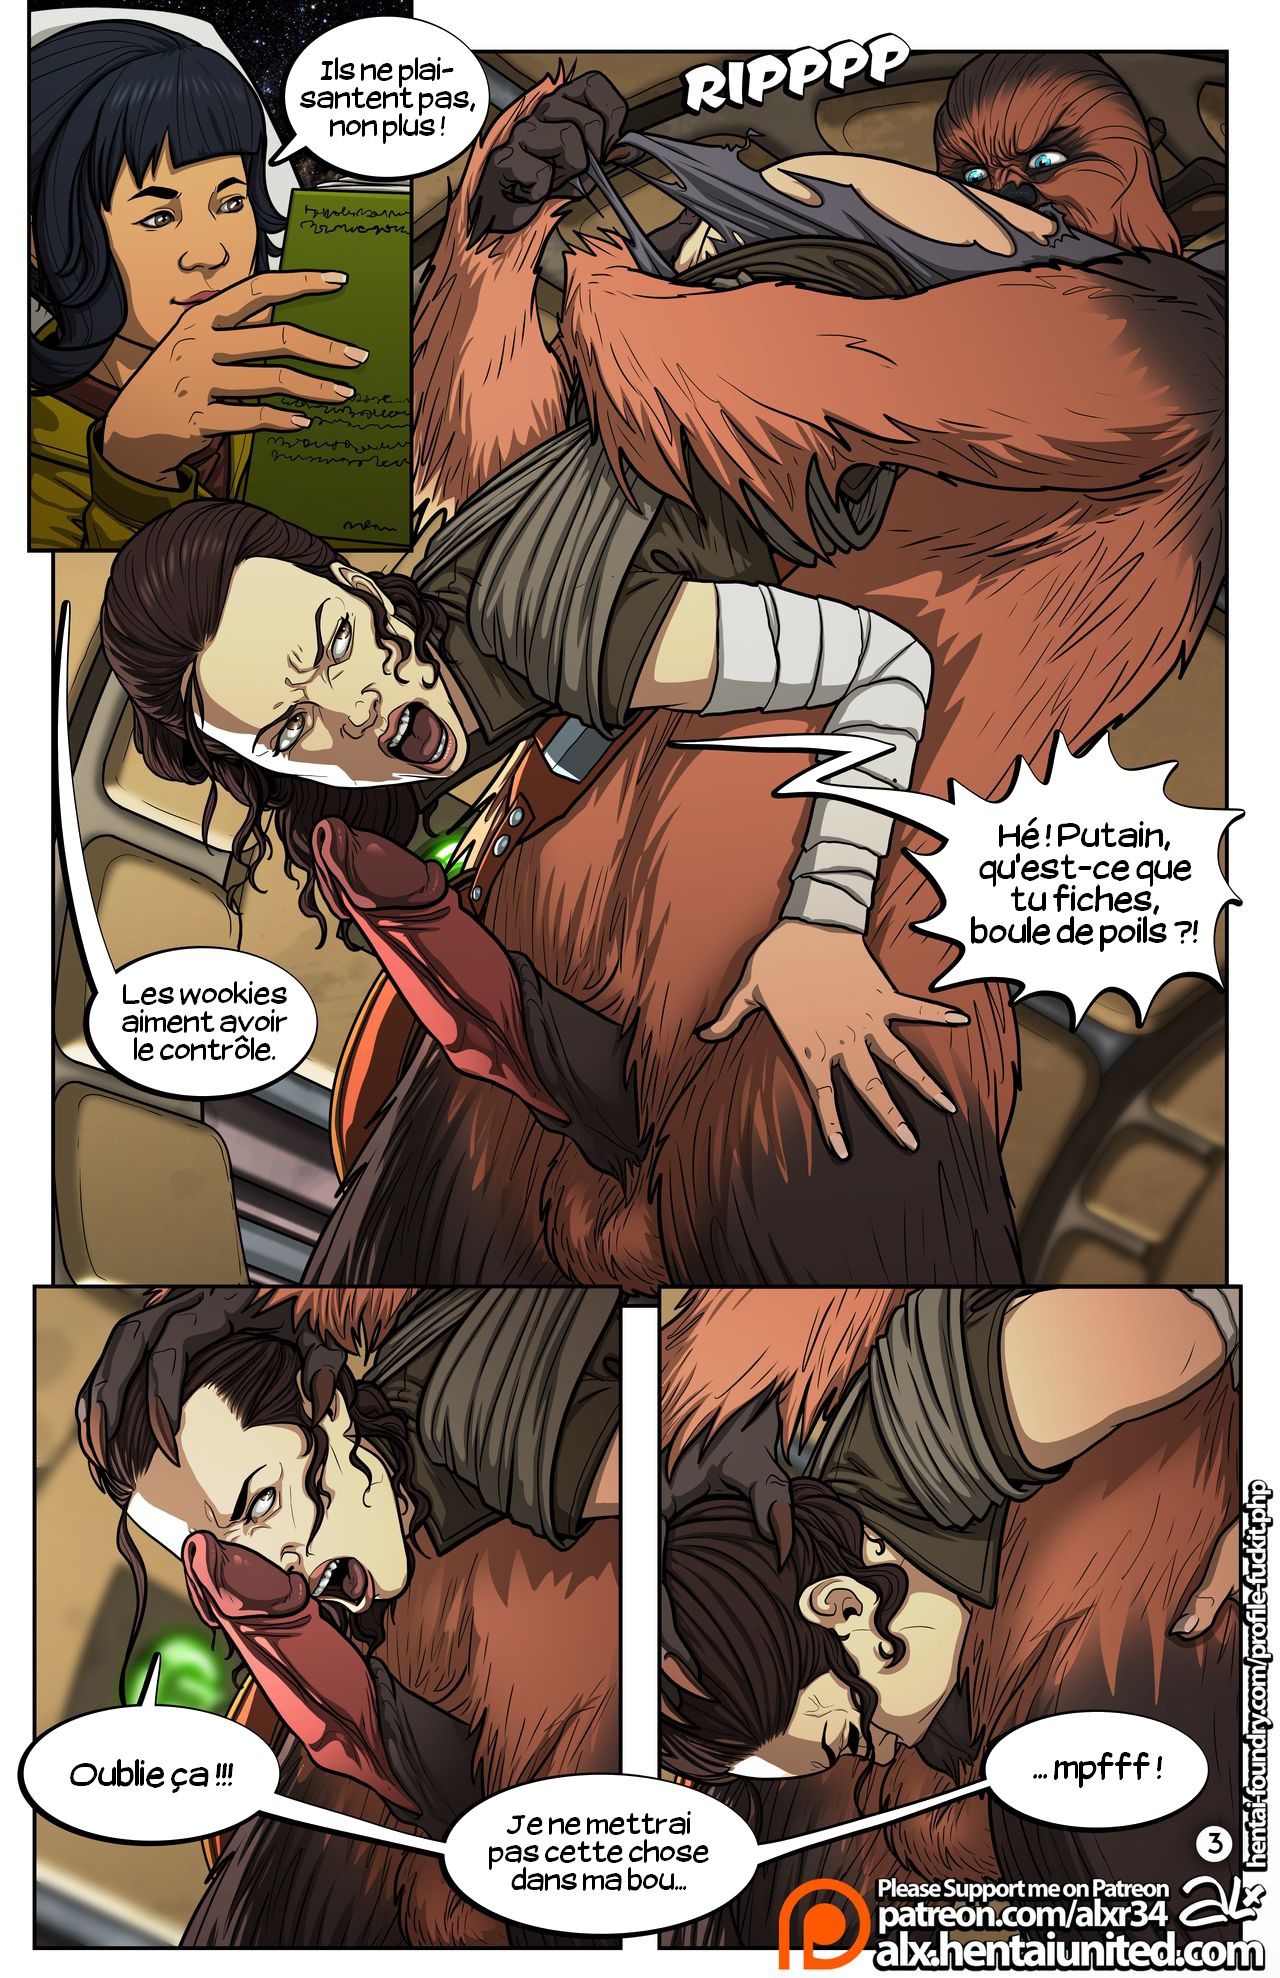 [Alx] Star Wars : A Complete Guide to Wookie Sex [French][Edd085] 4